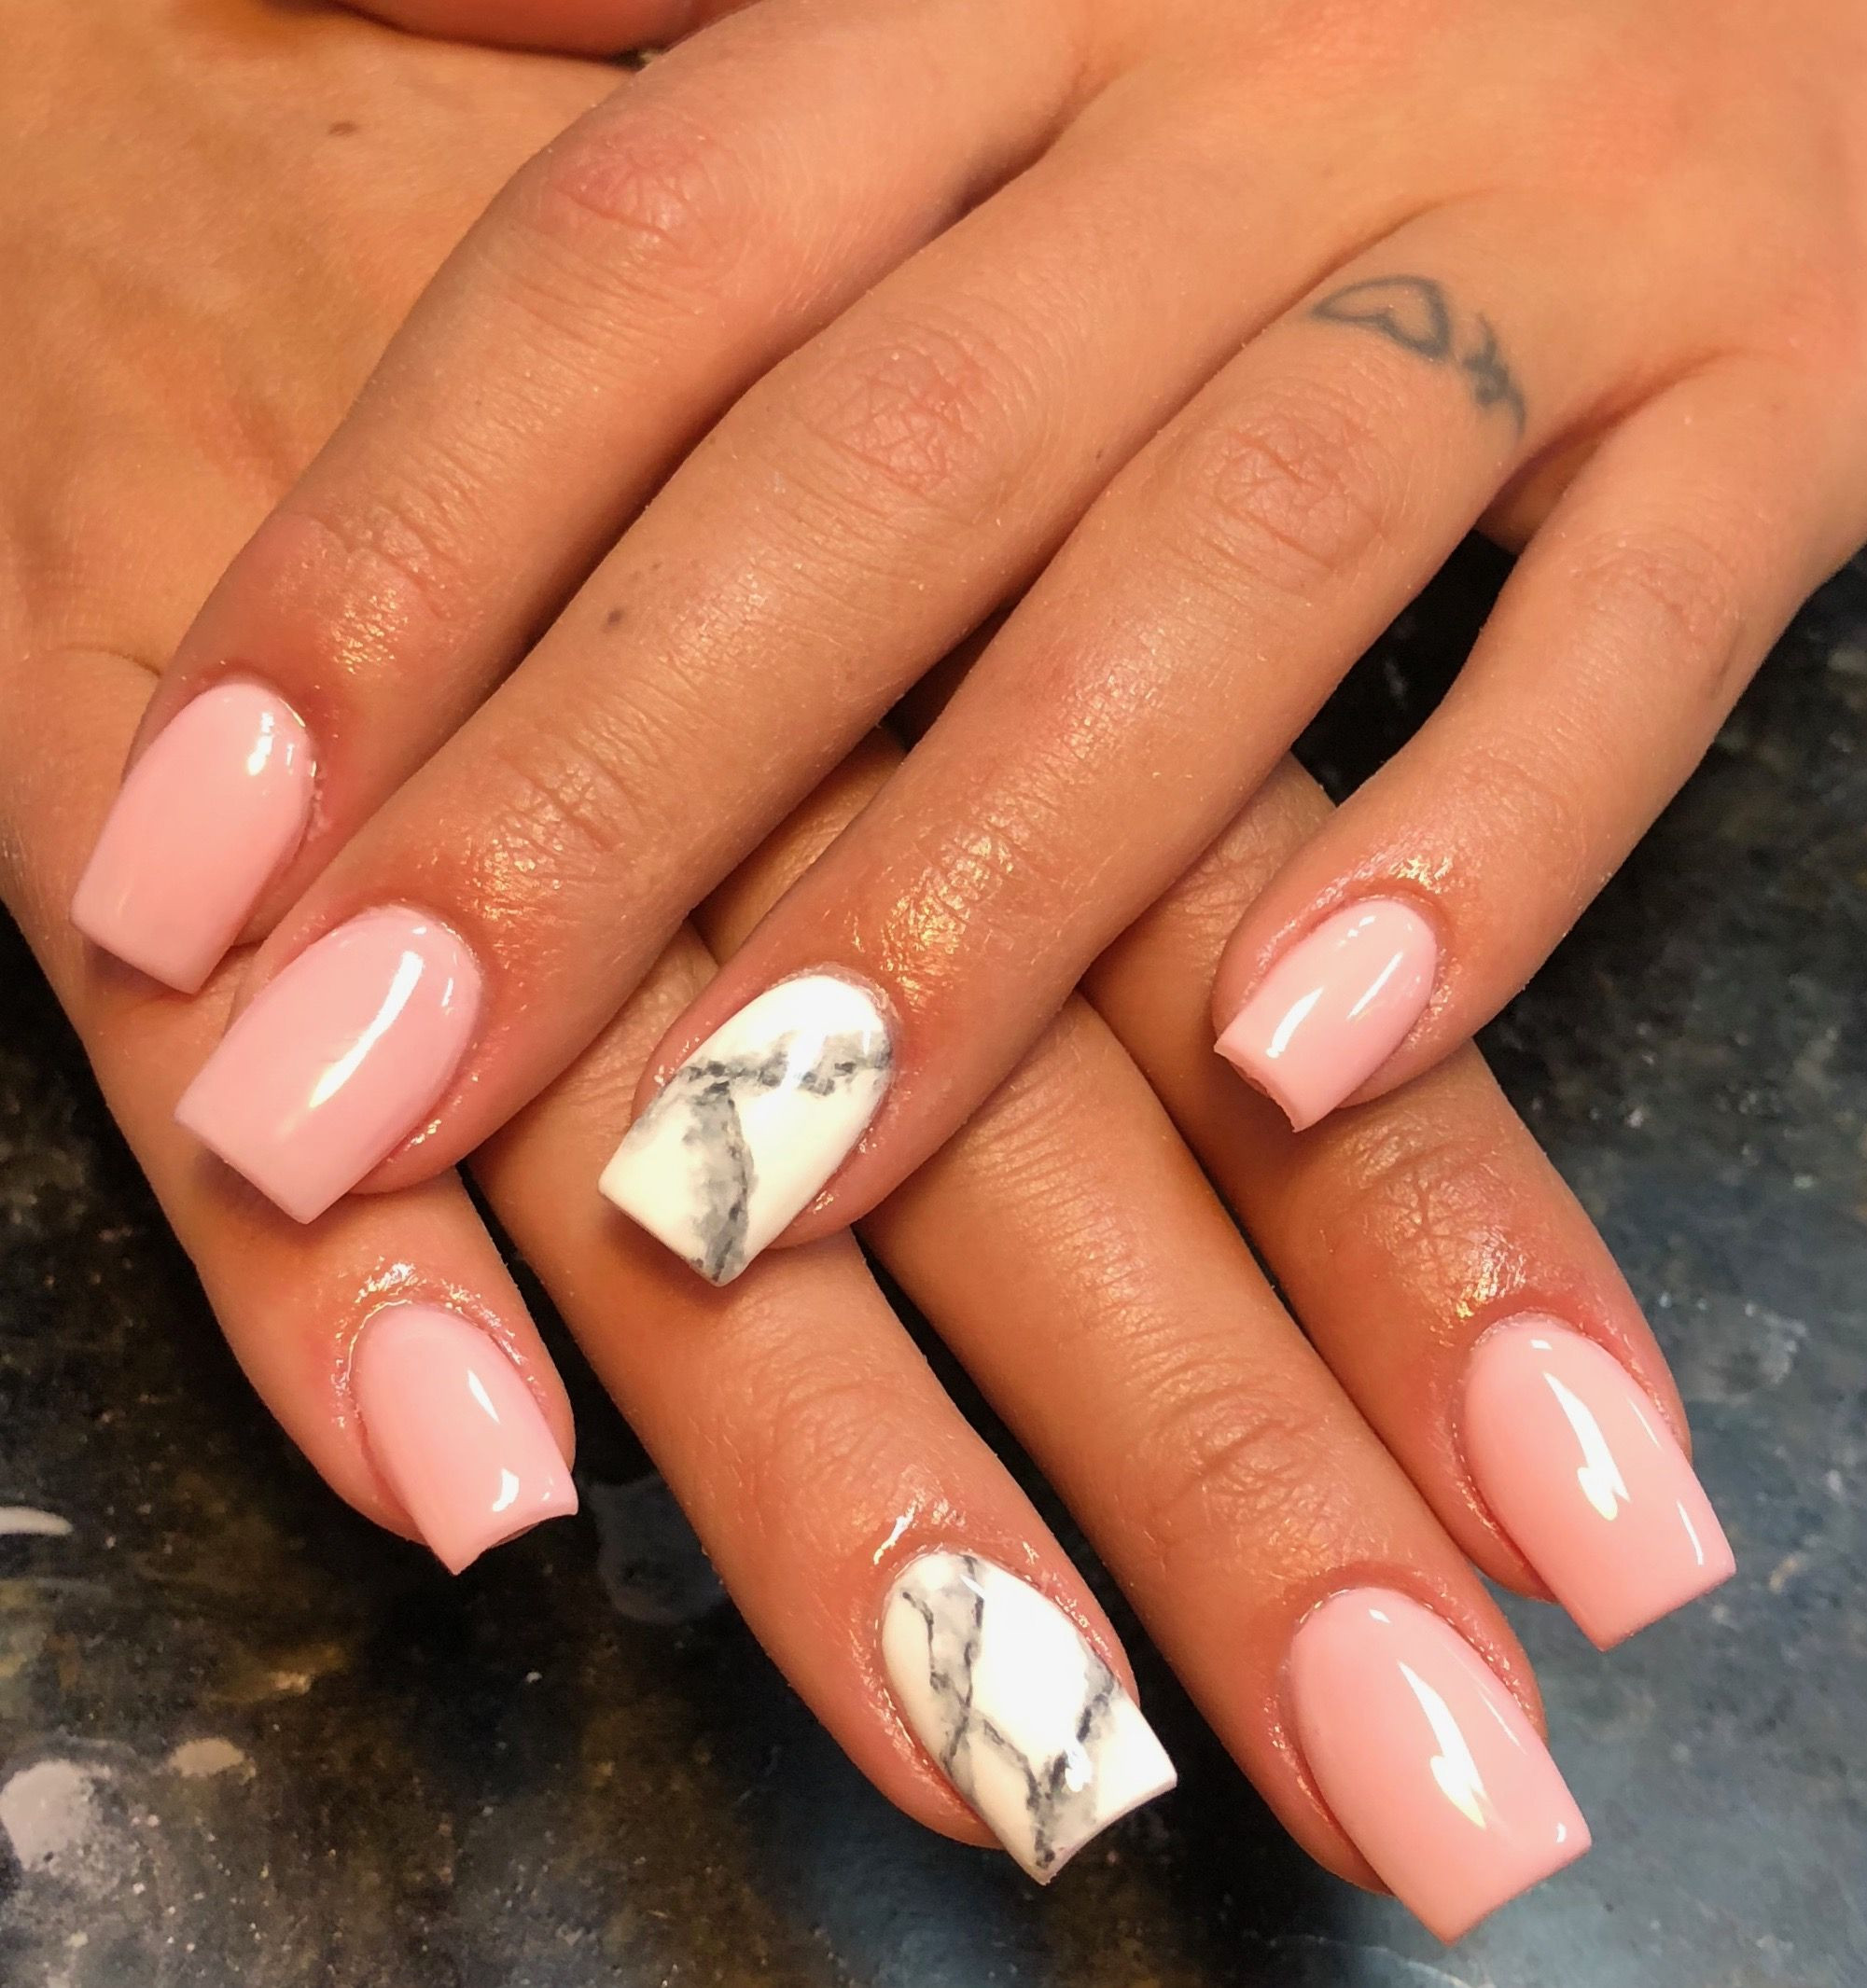 Nail Designs Square
 Pin by Leah Butler on Nails in 2019